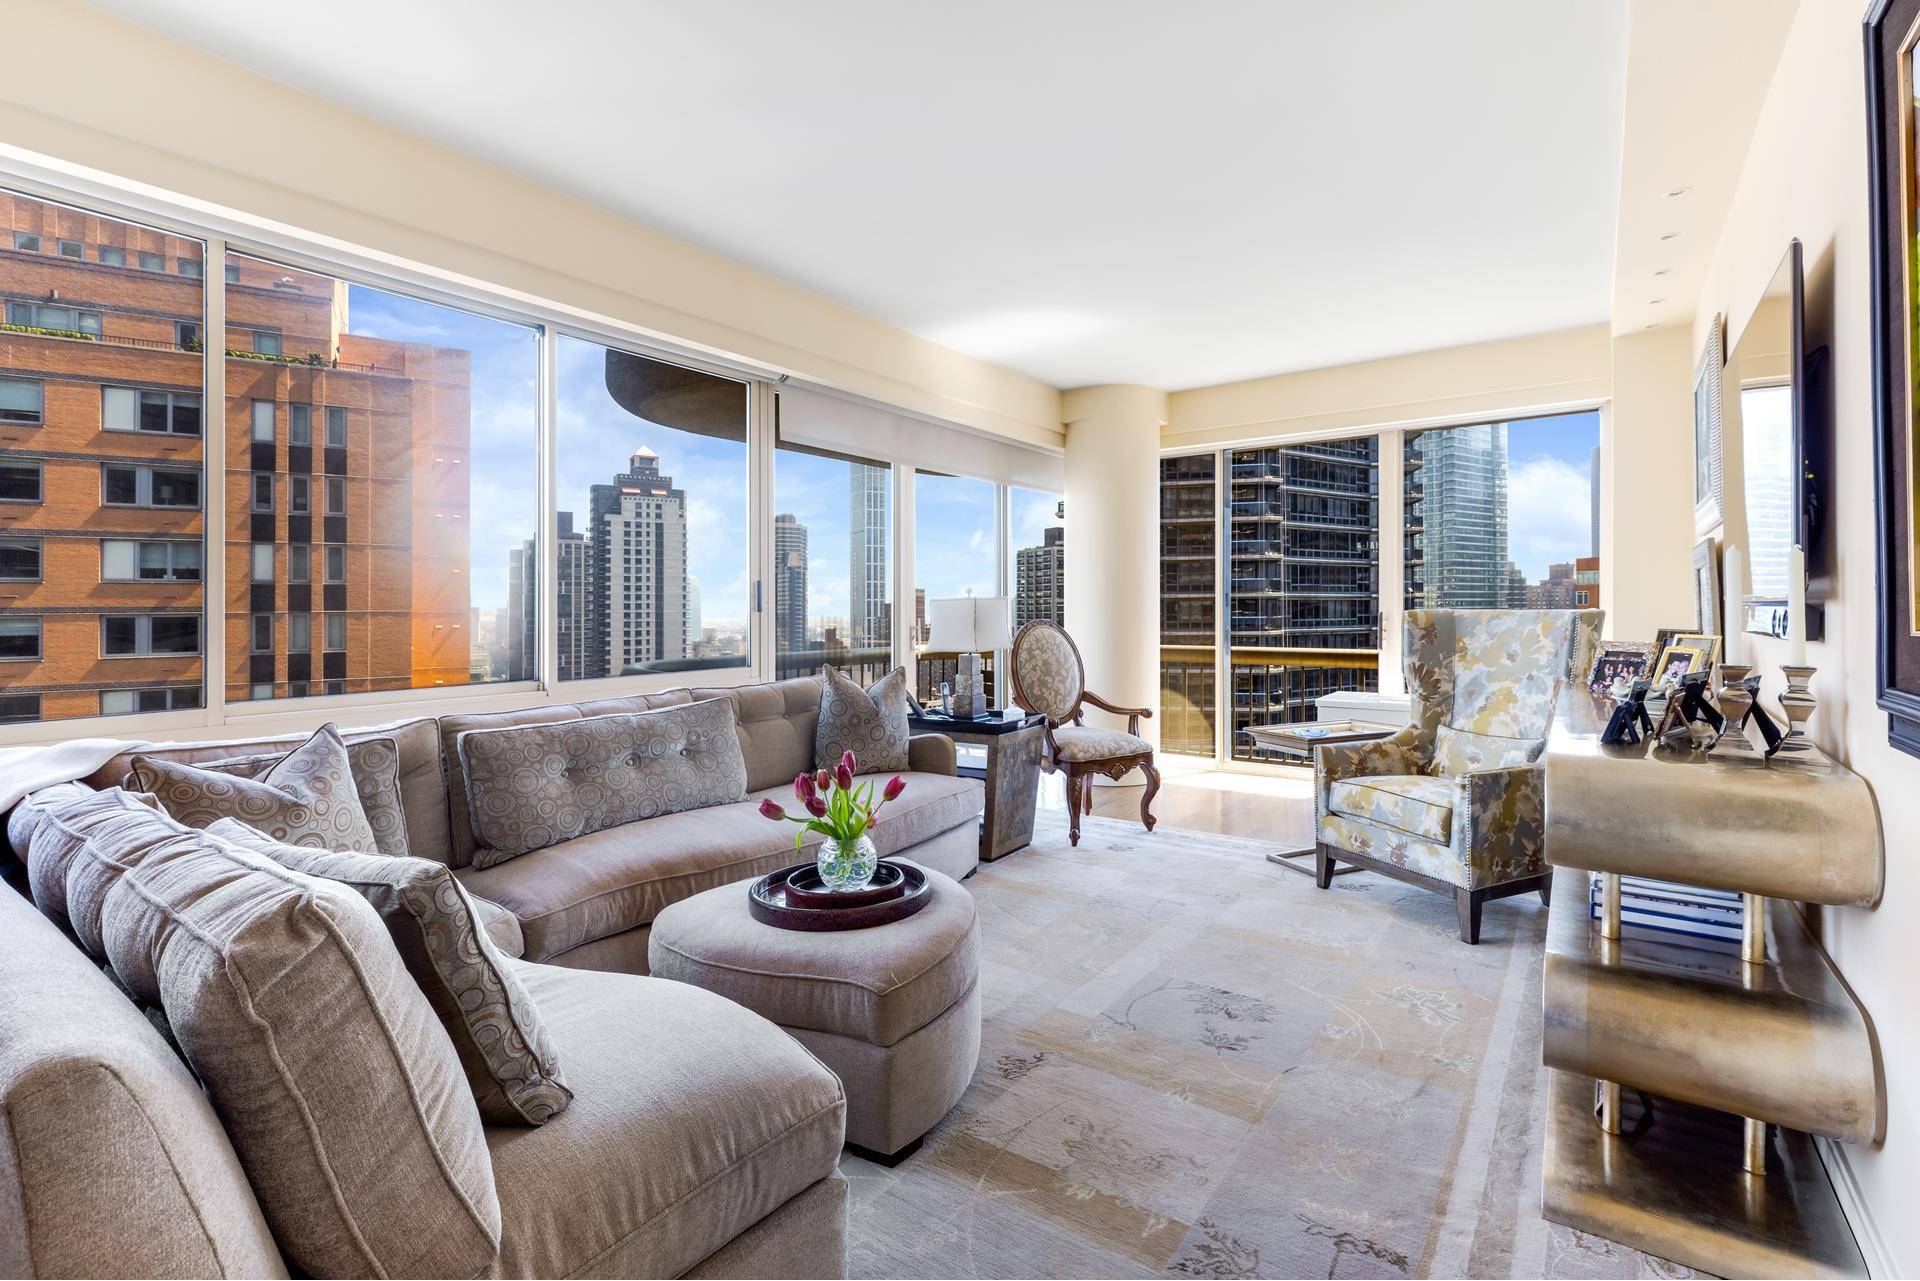 Resting high on the 28th floor of a sought after luxury cooperative in prime Lenox Hill, stunning 28A is truly awe inspiring with its amazing views, wraparound private balcony and ...